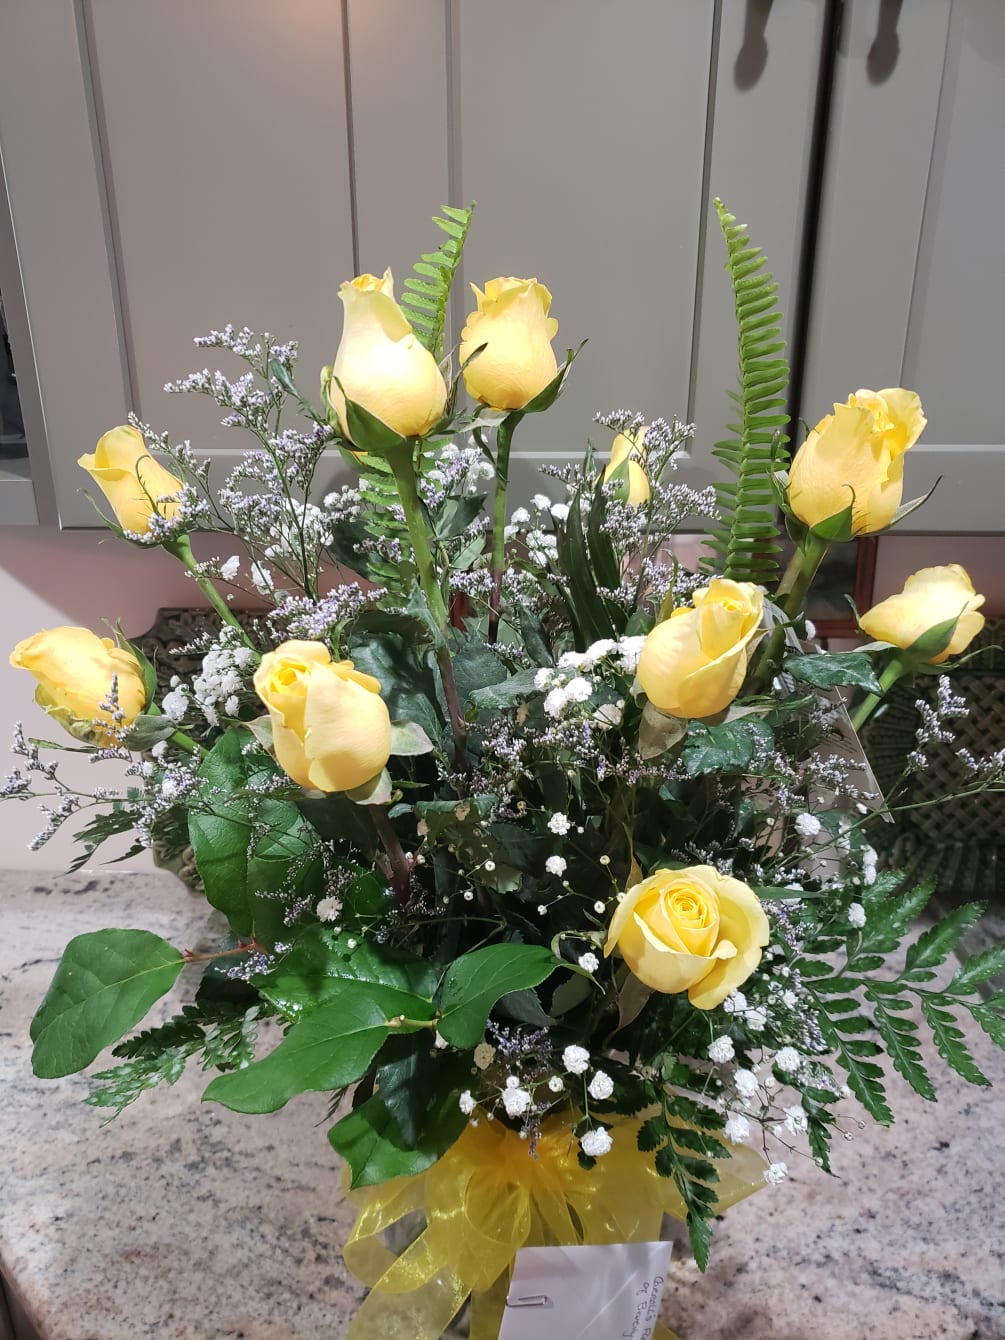 One Dozen yellow or cream Rose&#039;s arranged in a variety of glass